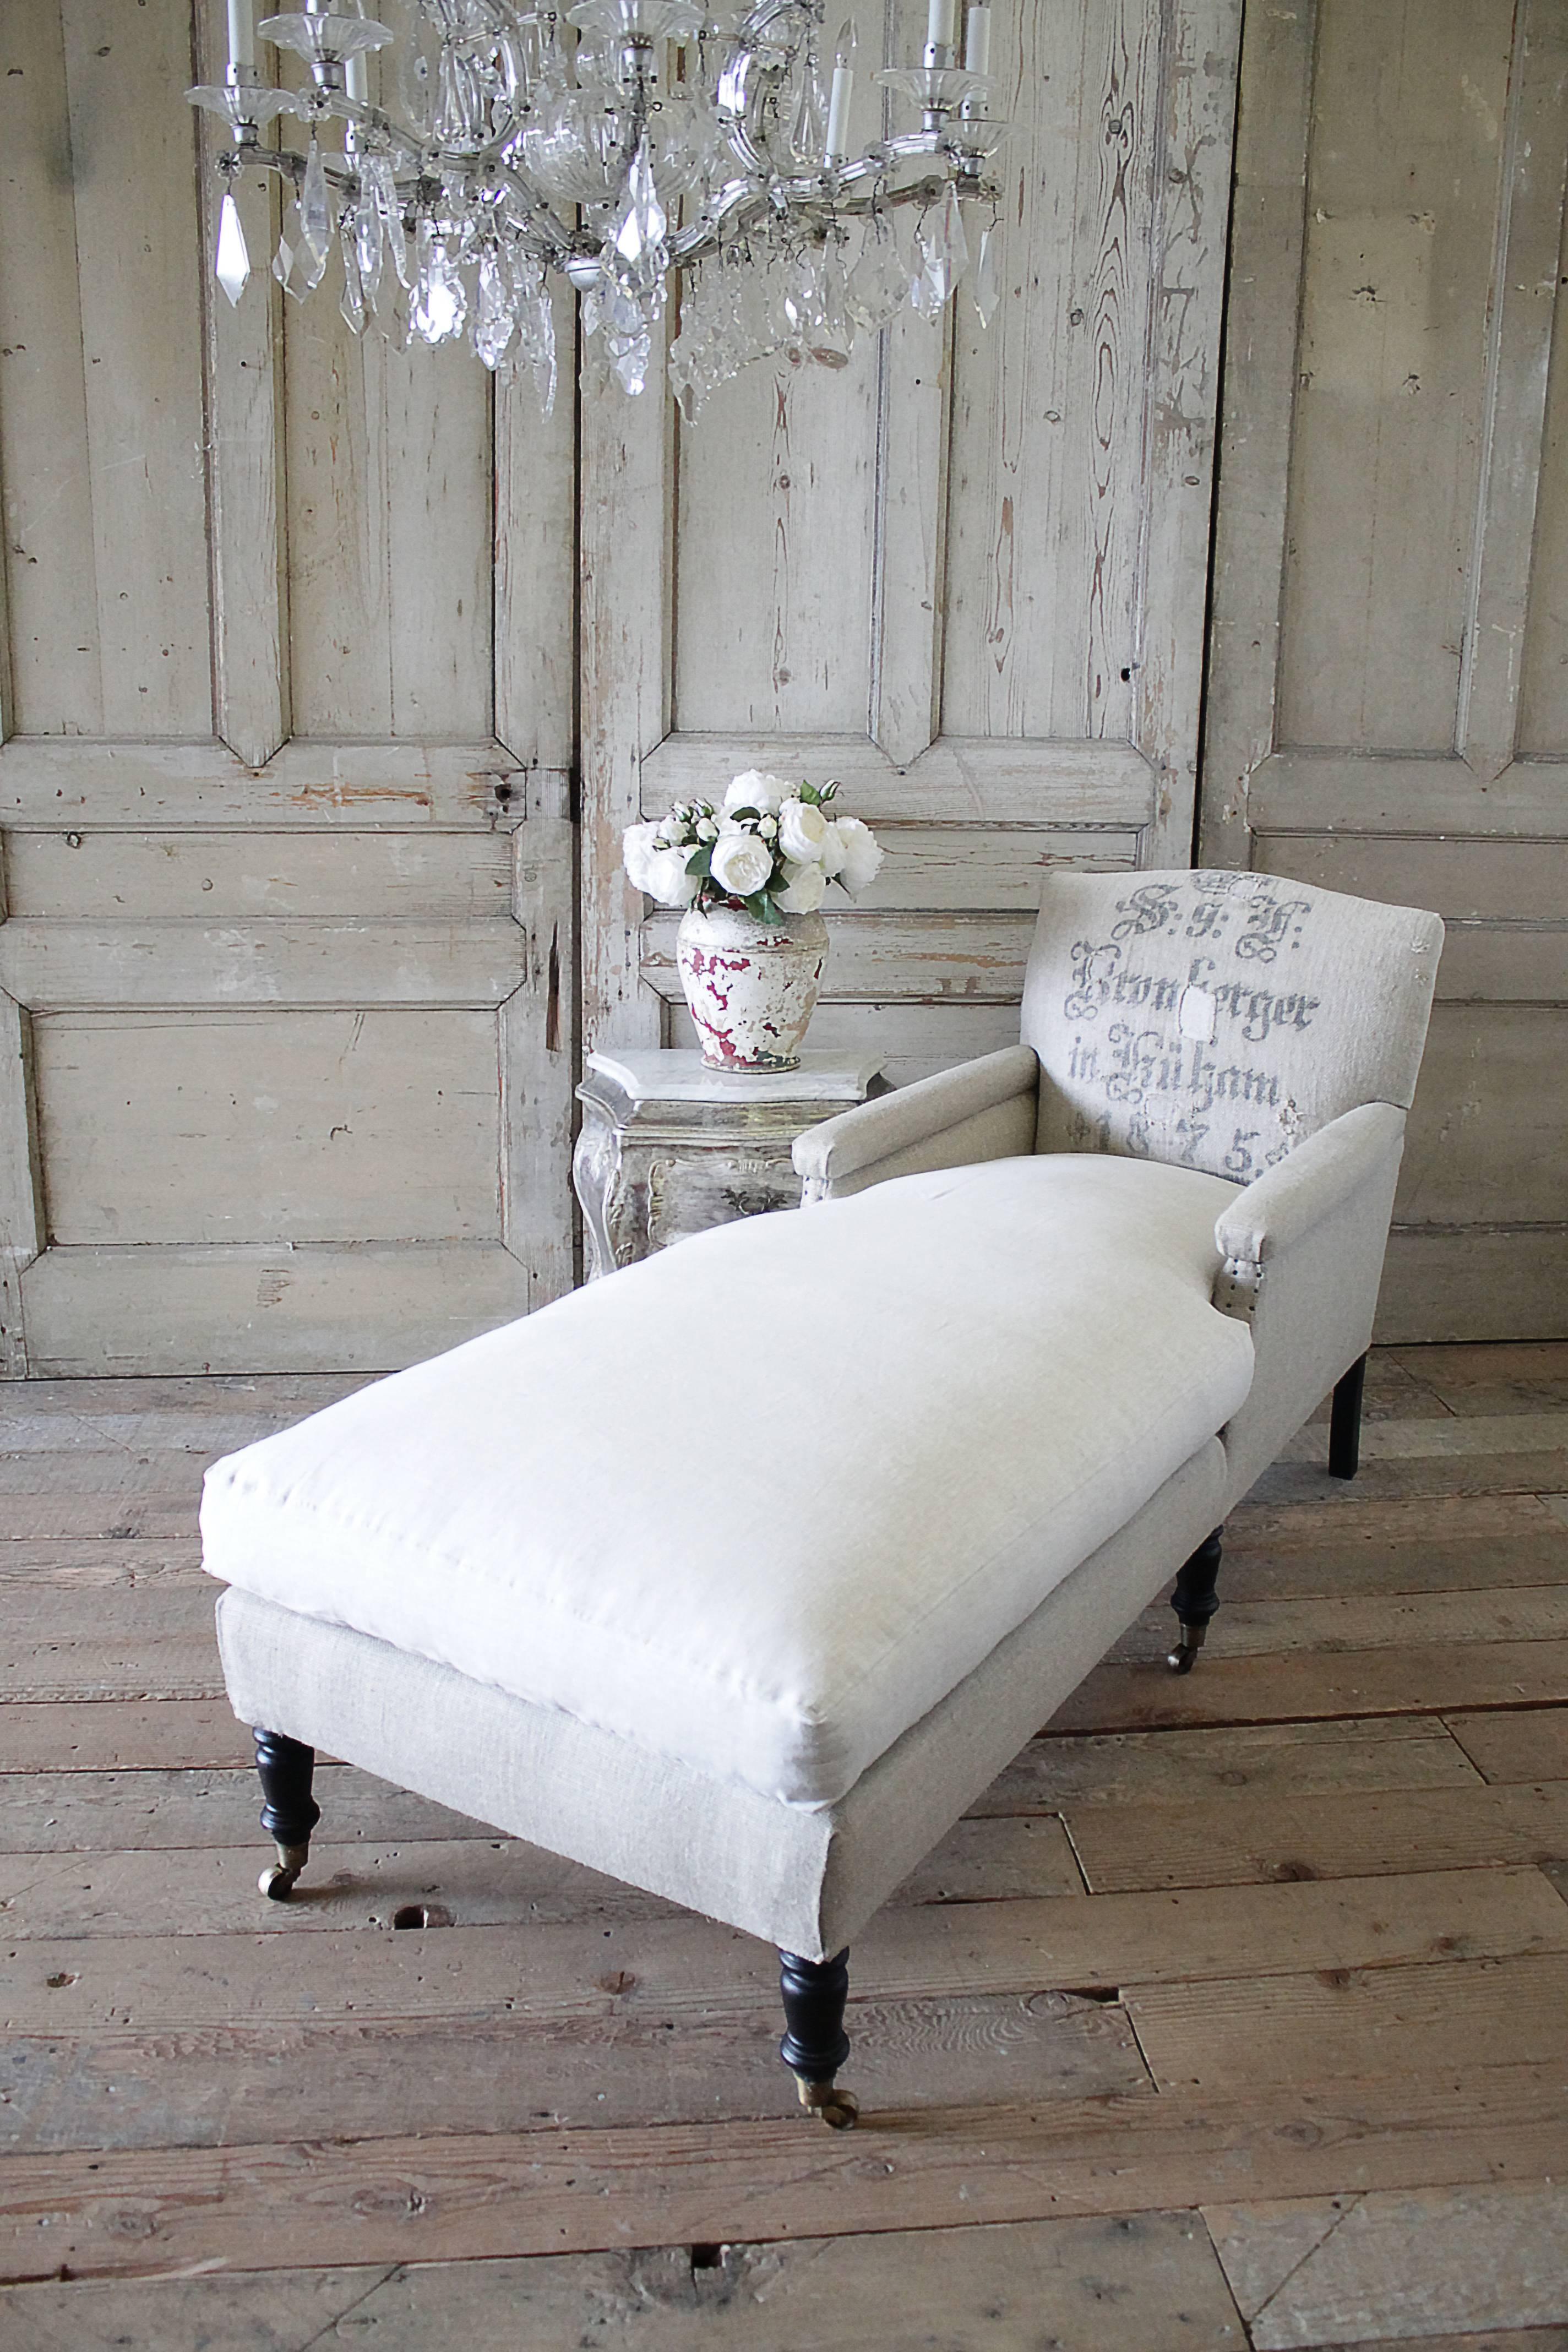 This beautiful high end chaise longue was custom-made with original antique German Grain Sack from 1875. Freshly laundered, and each patchwork design was carefully reinforced with an additional topstitch so we could keep this wonderful rustic